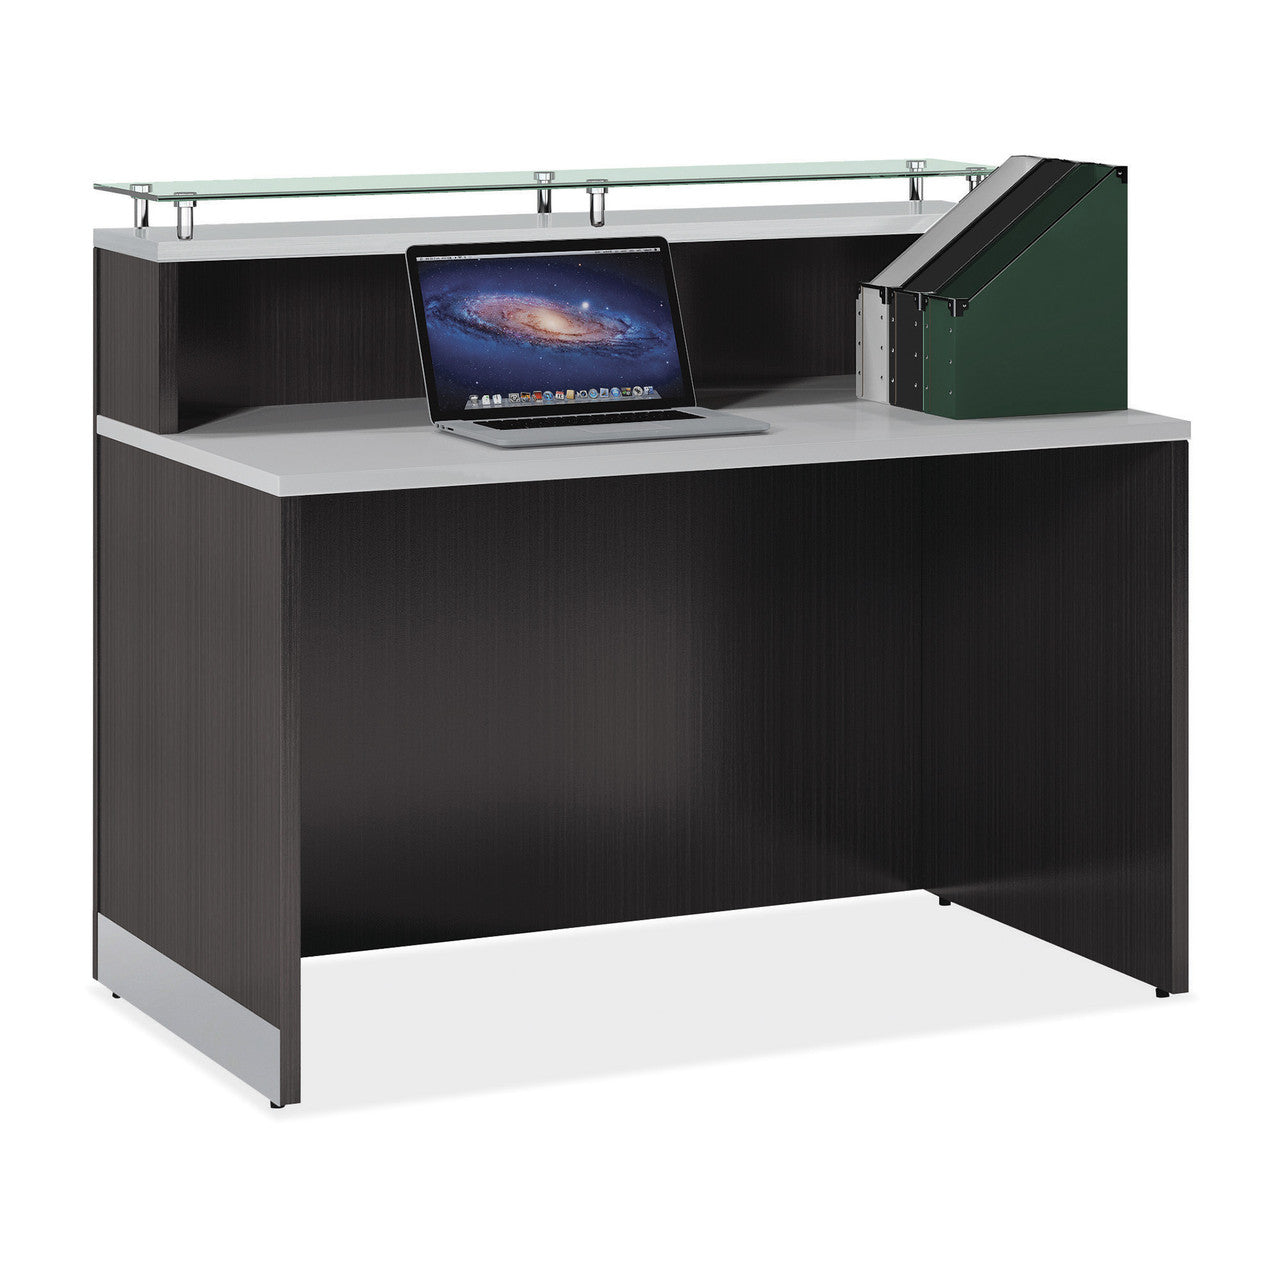 RCN4731 - Cosmo Collection 48" Glass Top Reception Desk by Office Source